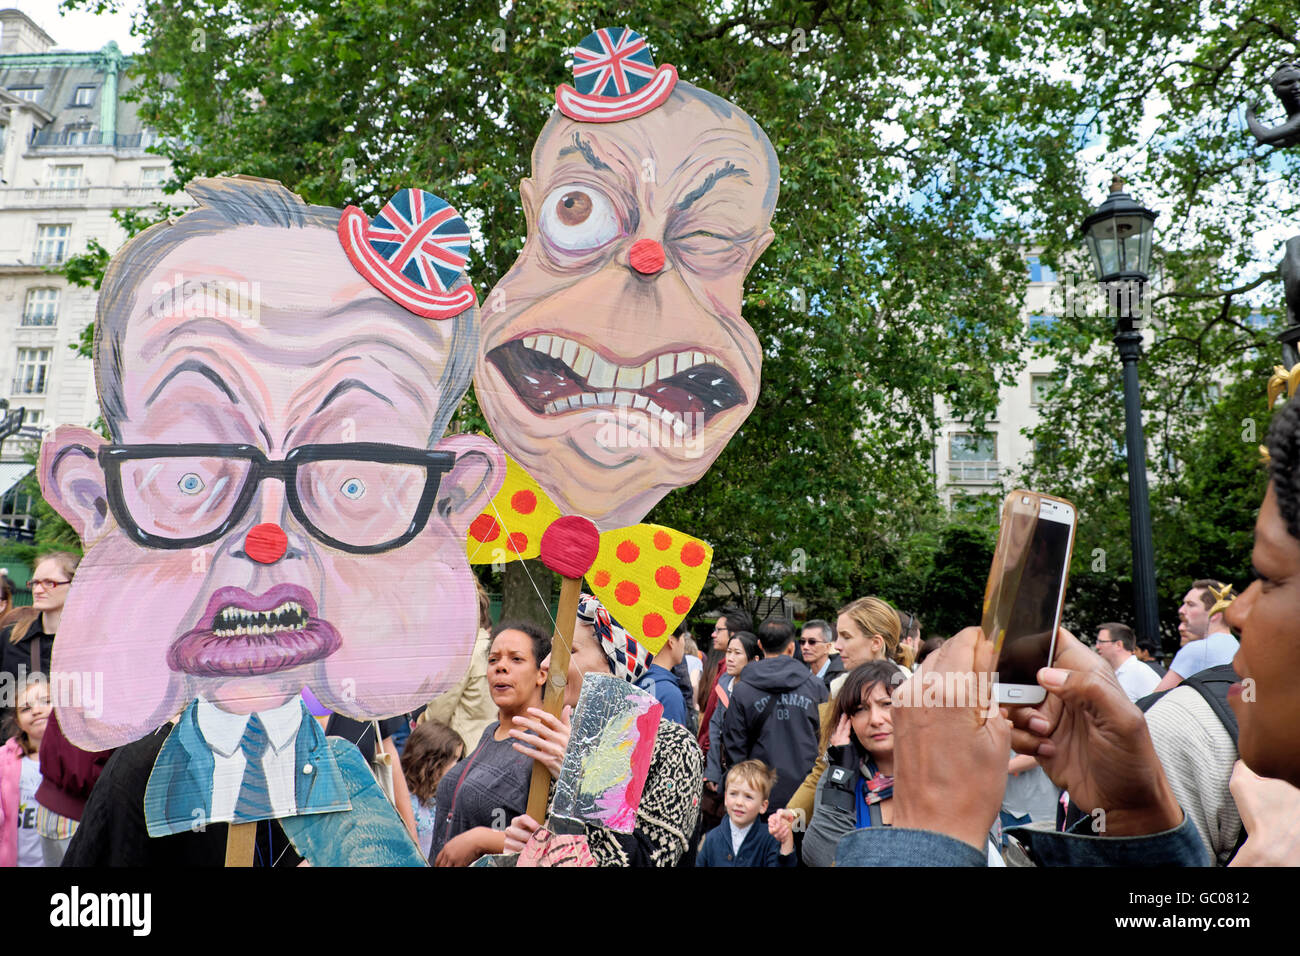 Michael Gove & Nigel Farage caricature signs at the Anti Brexit Protest on 2nd July 2016  in London England  23 June 2016  KATHY DEWITT Stock Photo